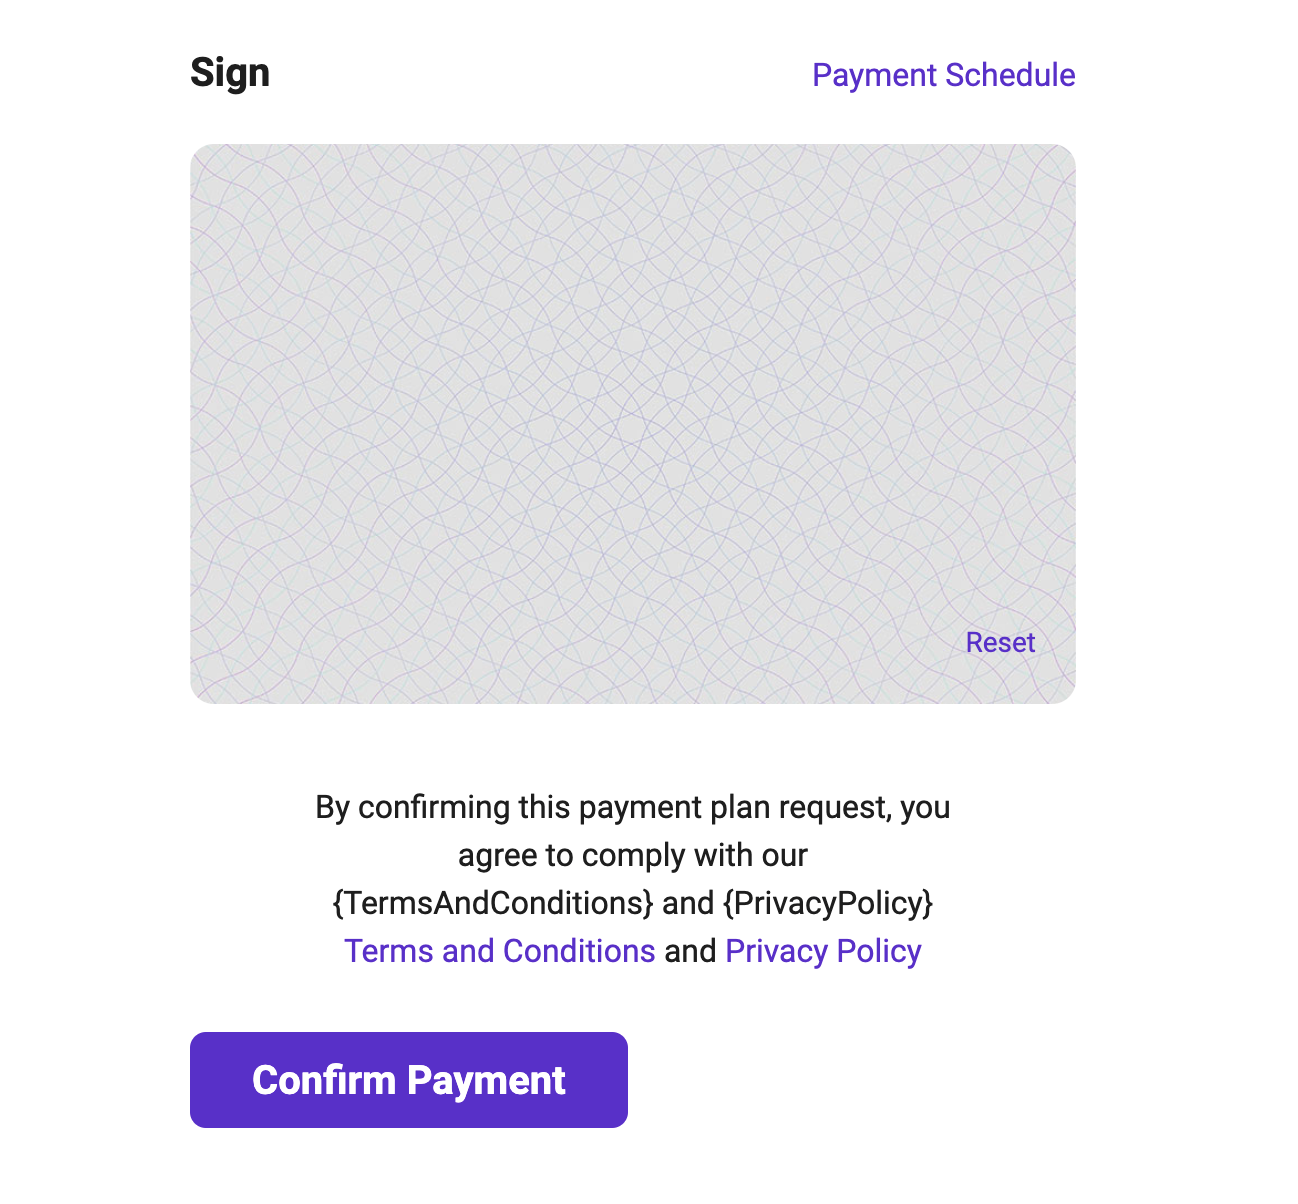 Creating_a_Payment_Plan_in_the_Merchant_Portal_4.png